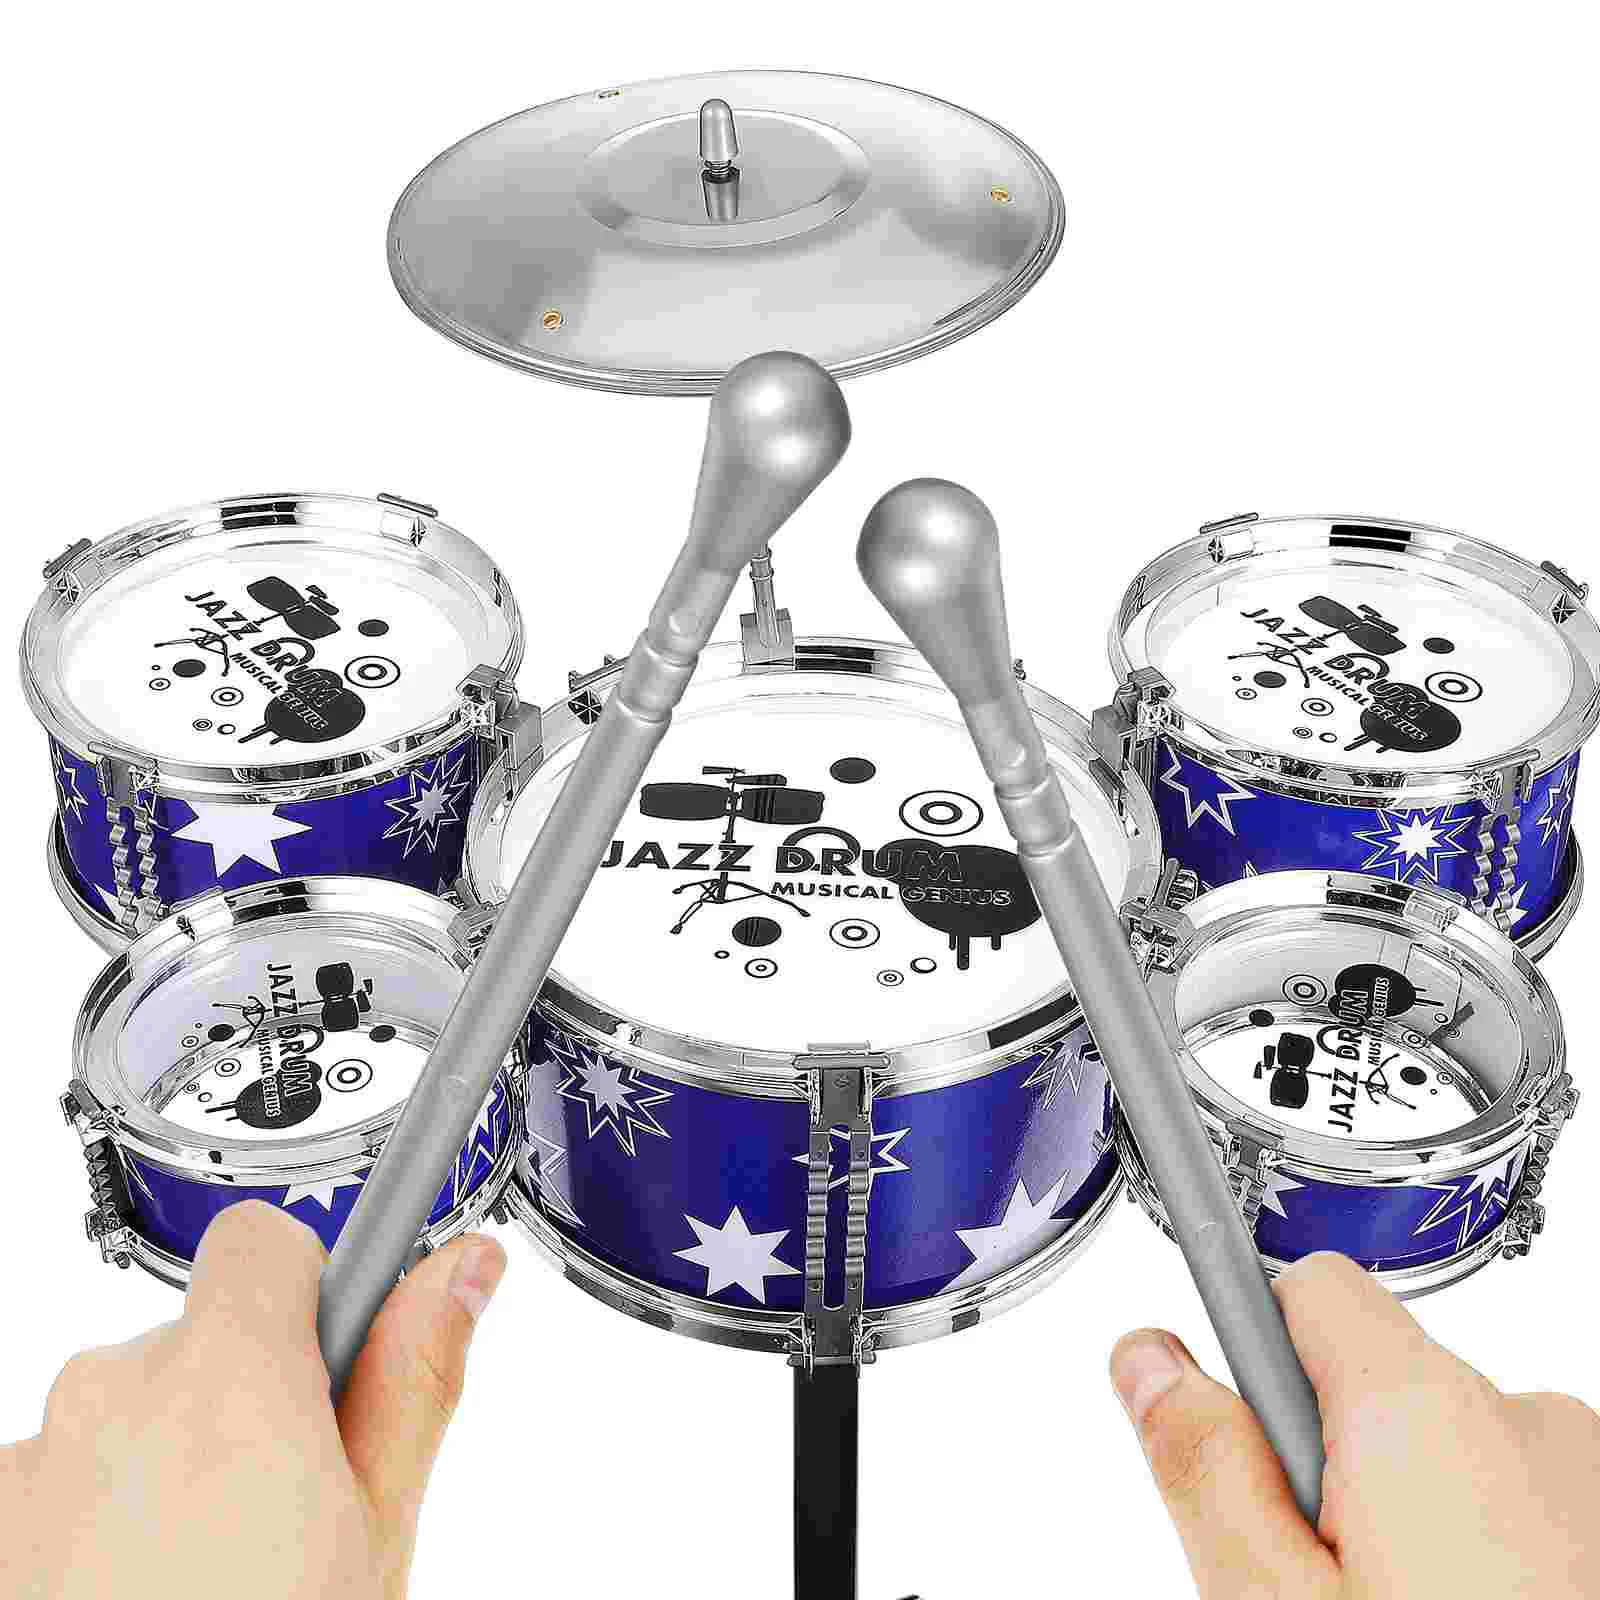 

Drum Kit Toy Percussion Musical Instruments Dropshipping Plastic Jazz Toddler Playset